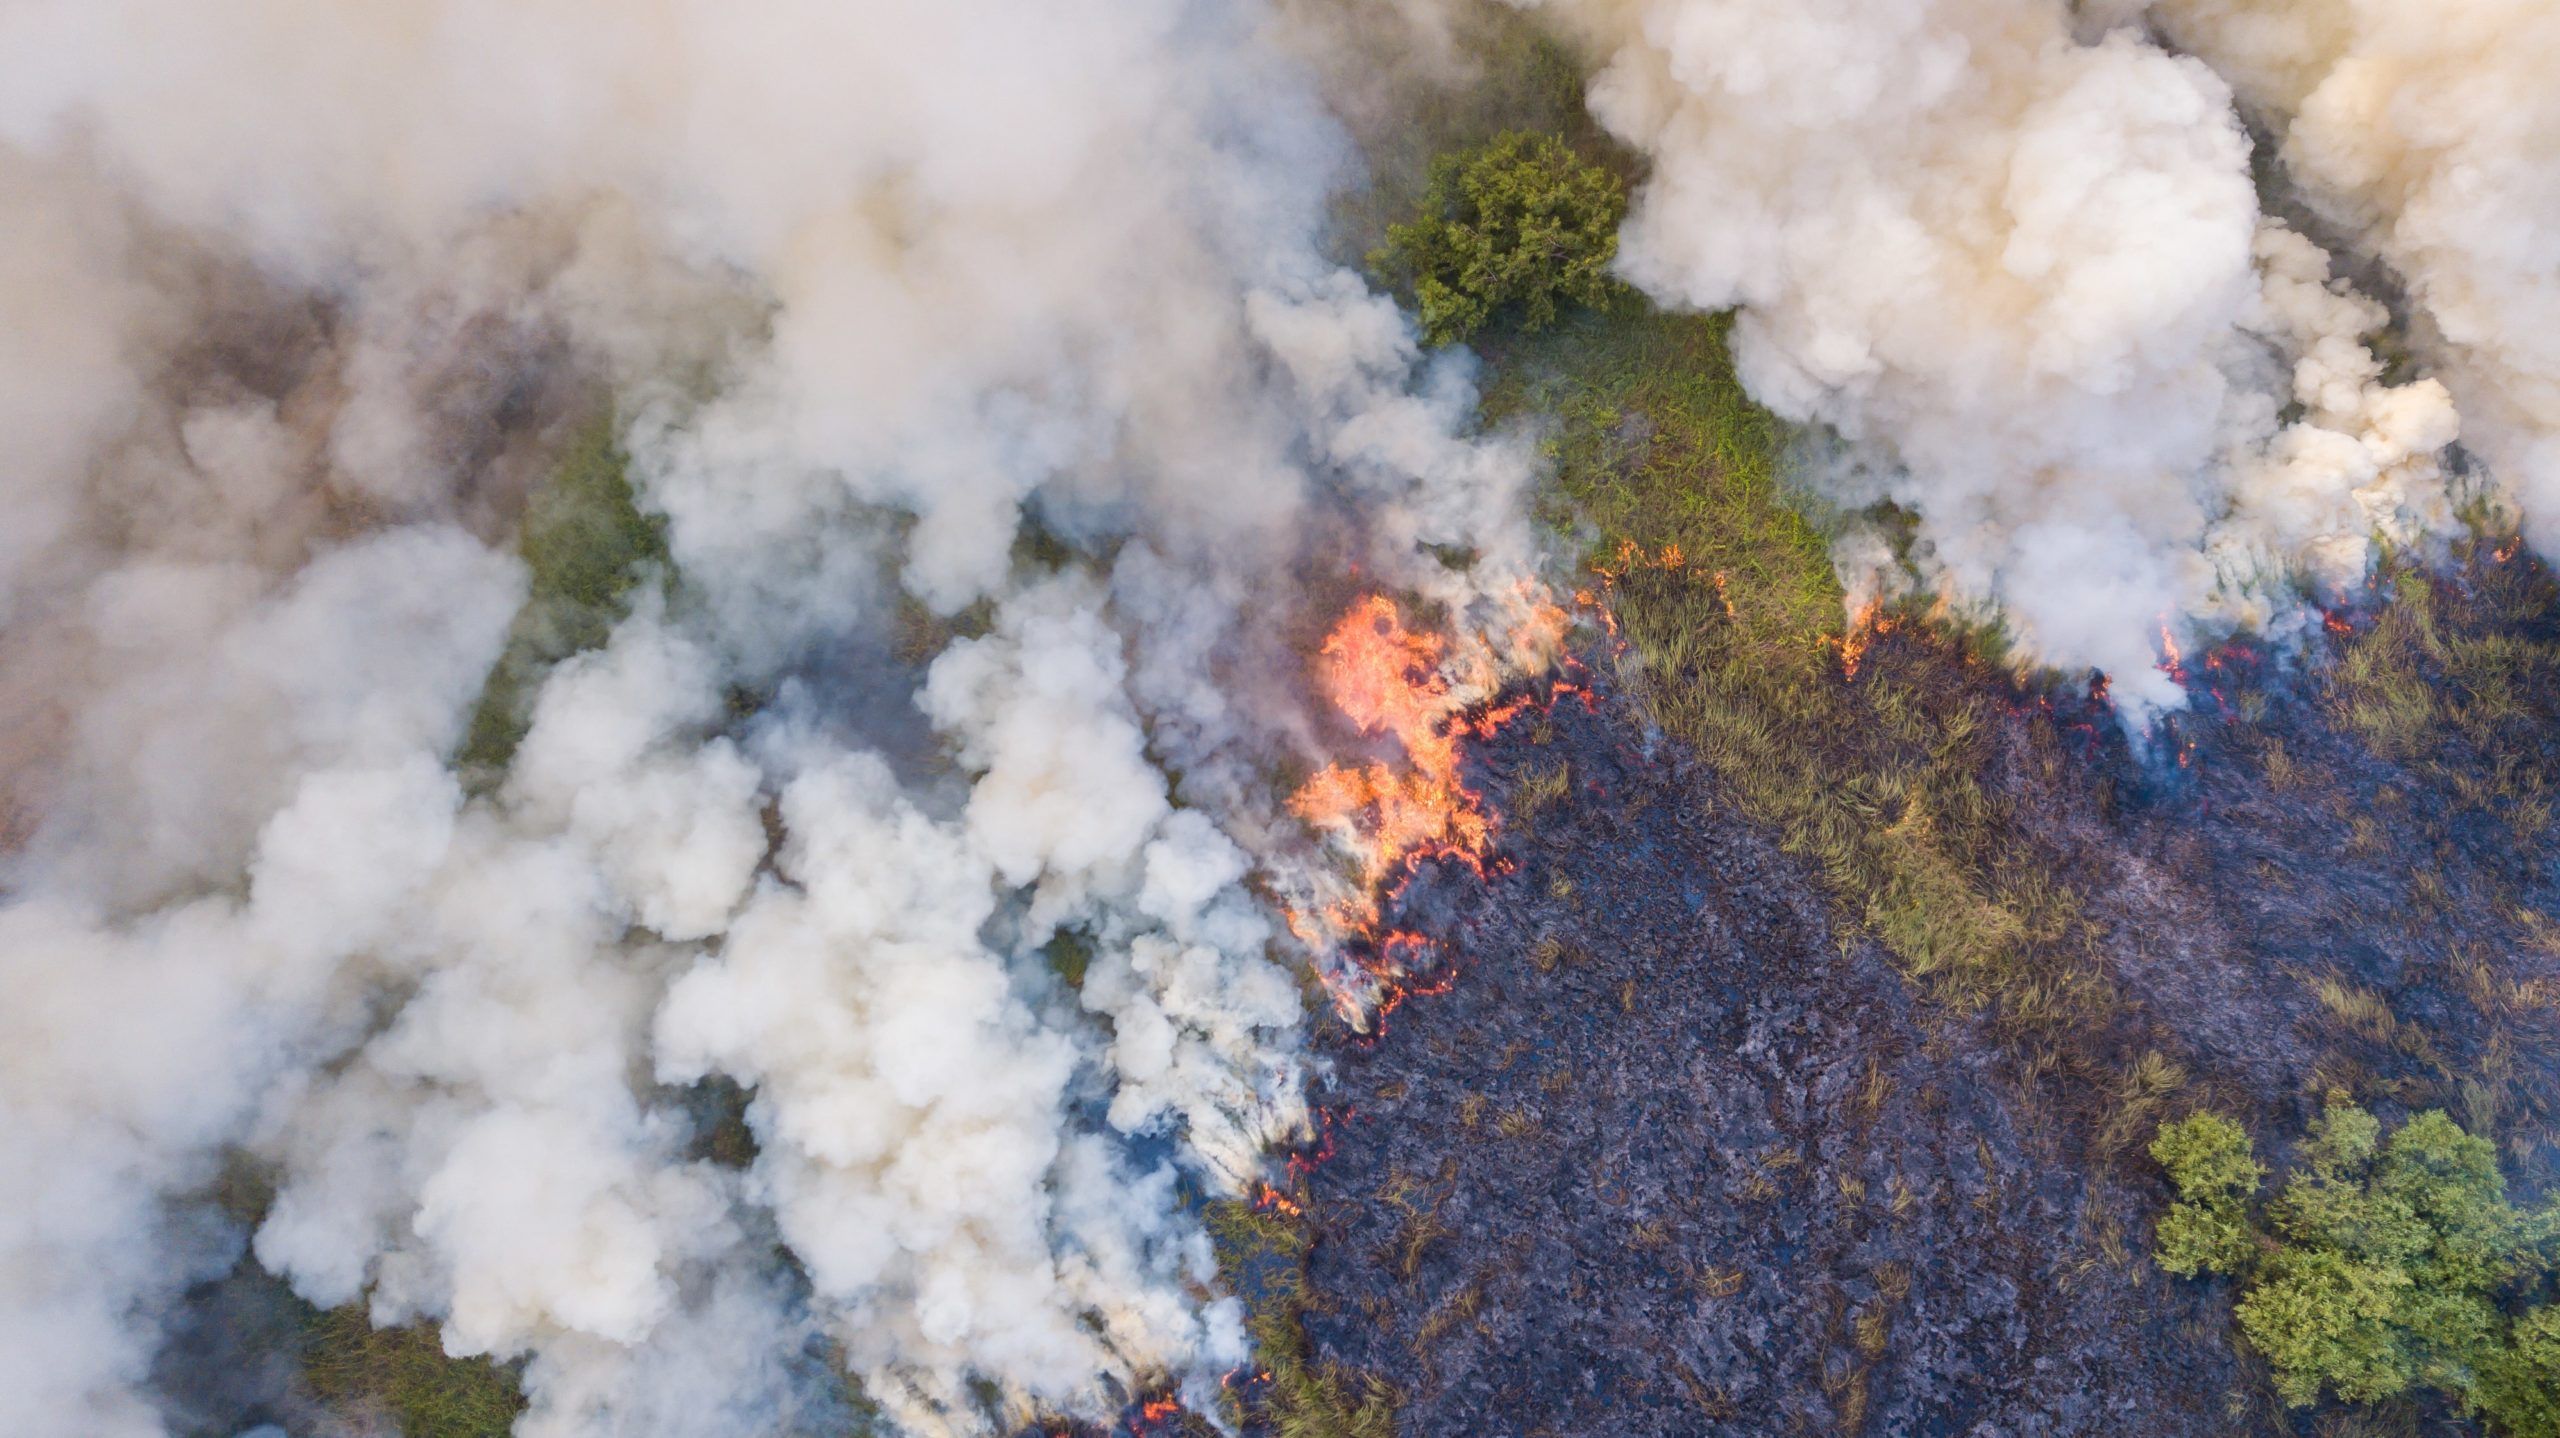 Use Cases for Remote Sensing in Forest Fire Management